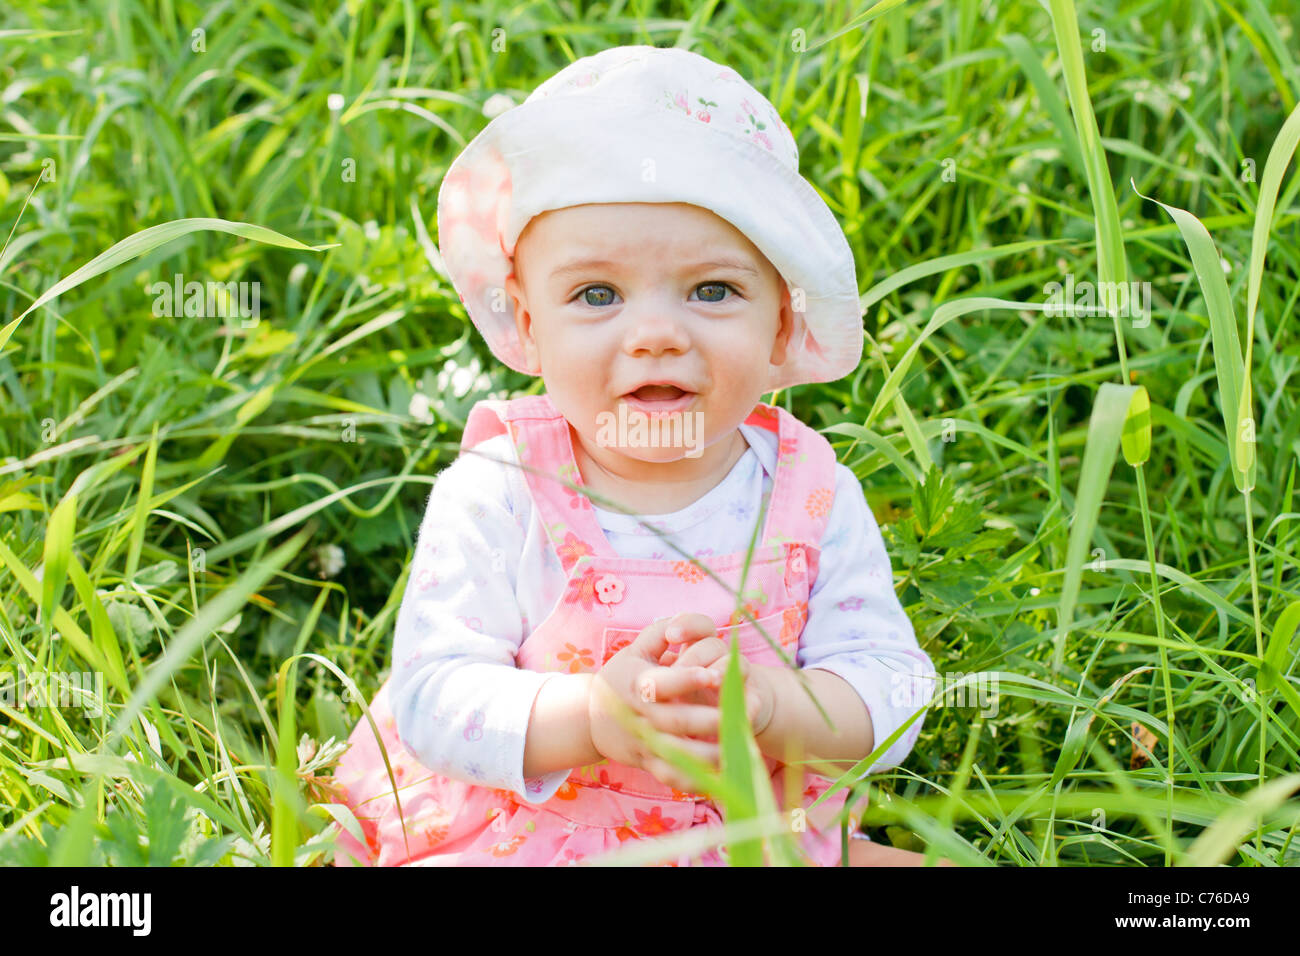 Happy Baby Girl with blue eyes lying on grass Banque D'Images